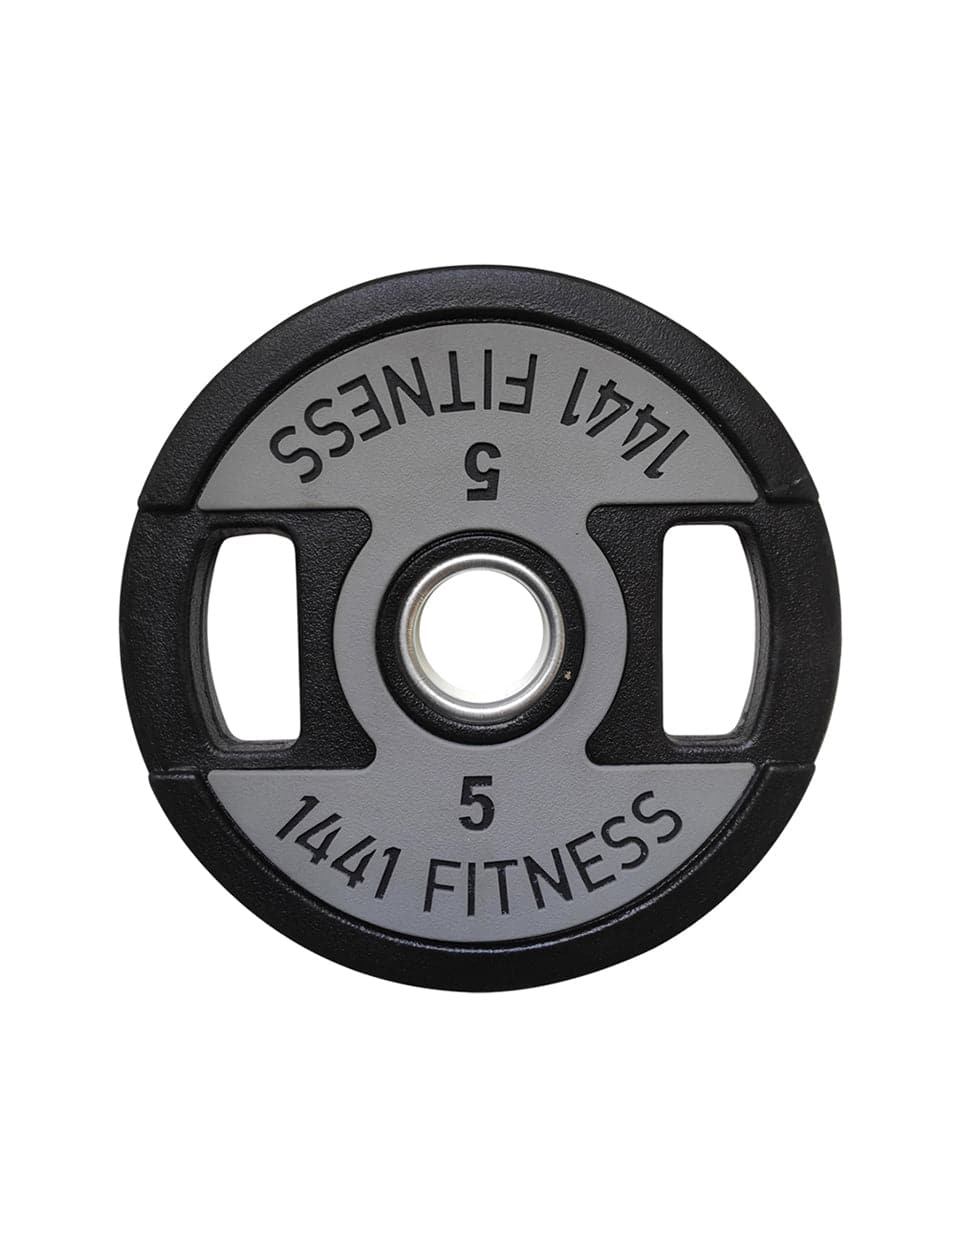 Combo | 1441 Fitness 6 Ft Olympic Barbell With Dual Grip Olympic Plates Set | 60 Kg Set - Athletix.ae